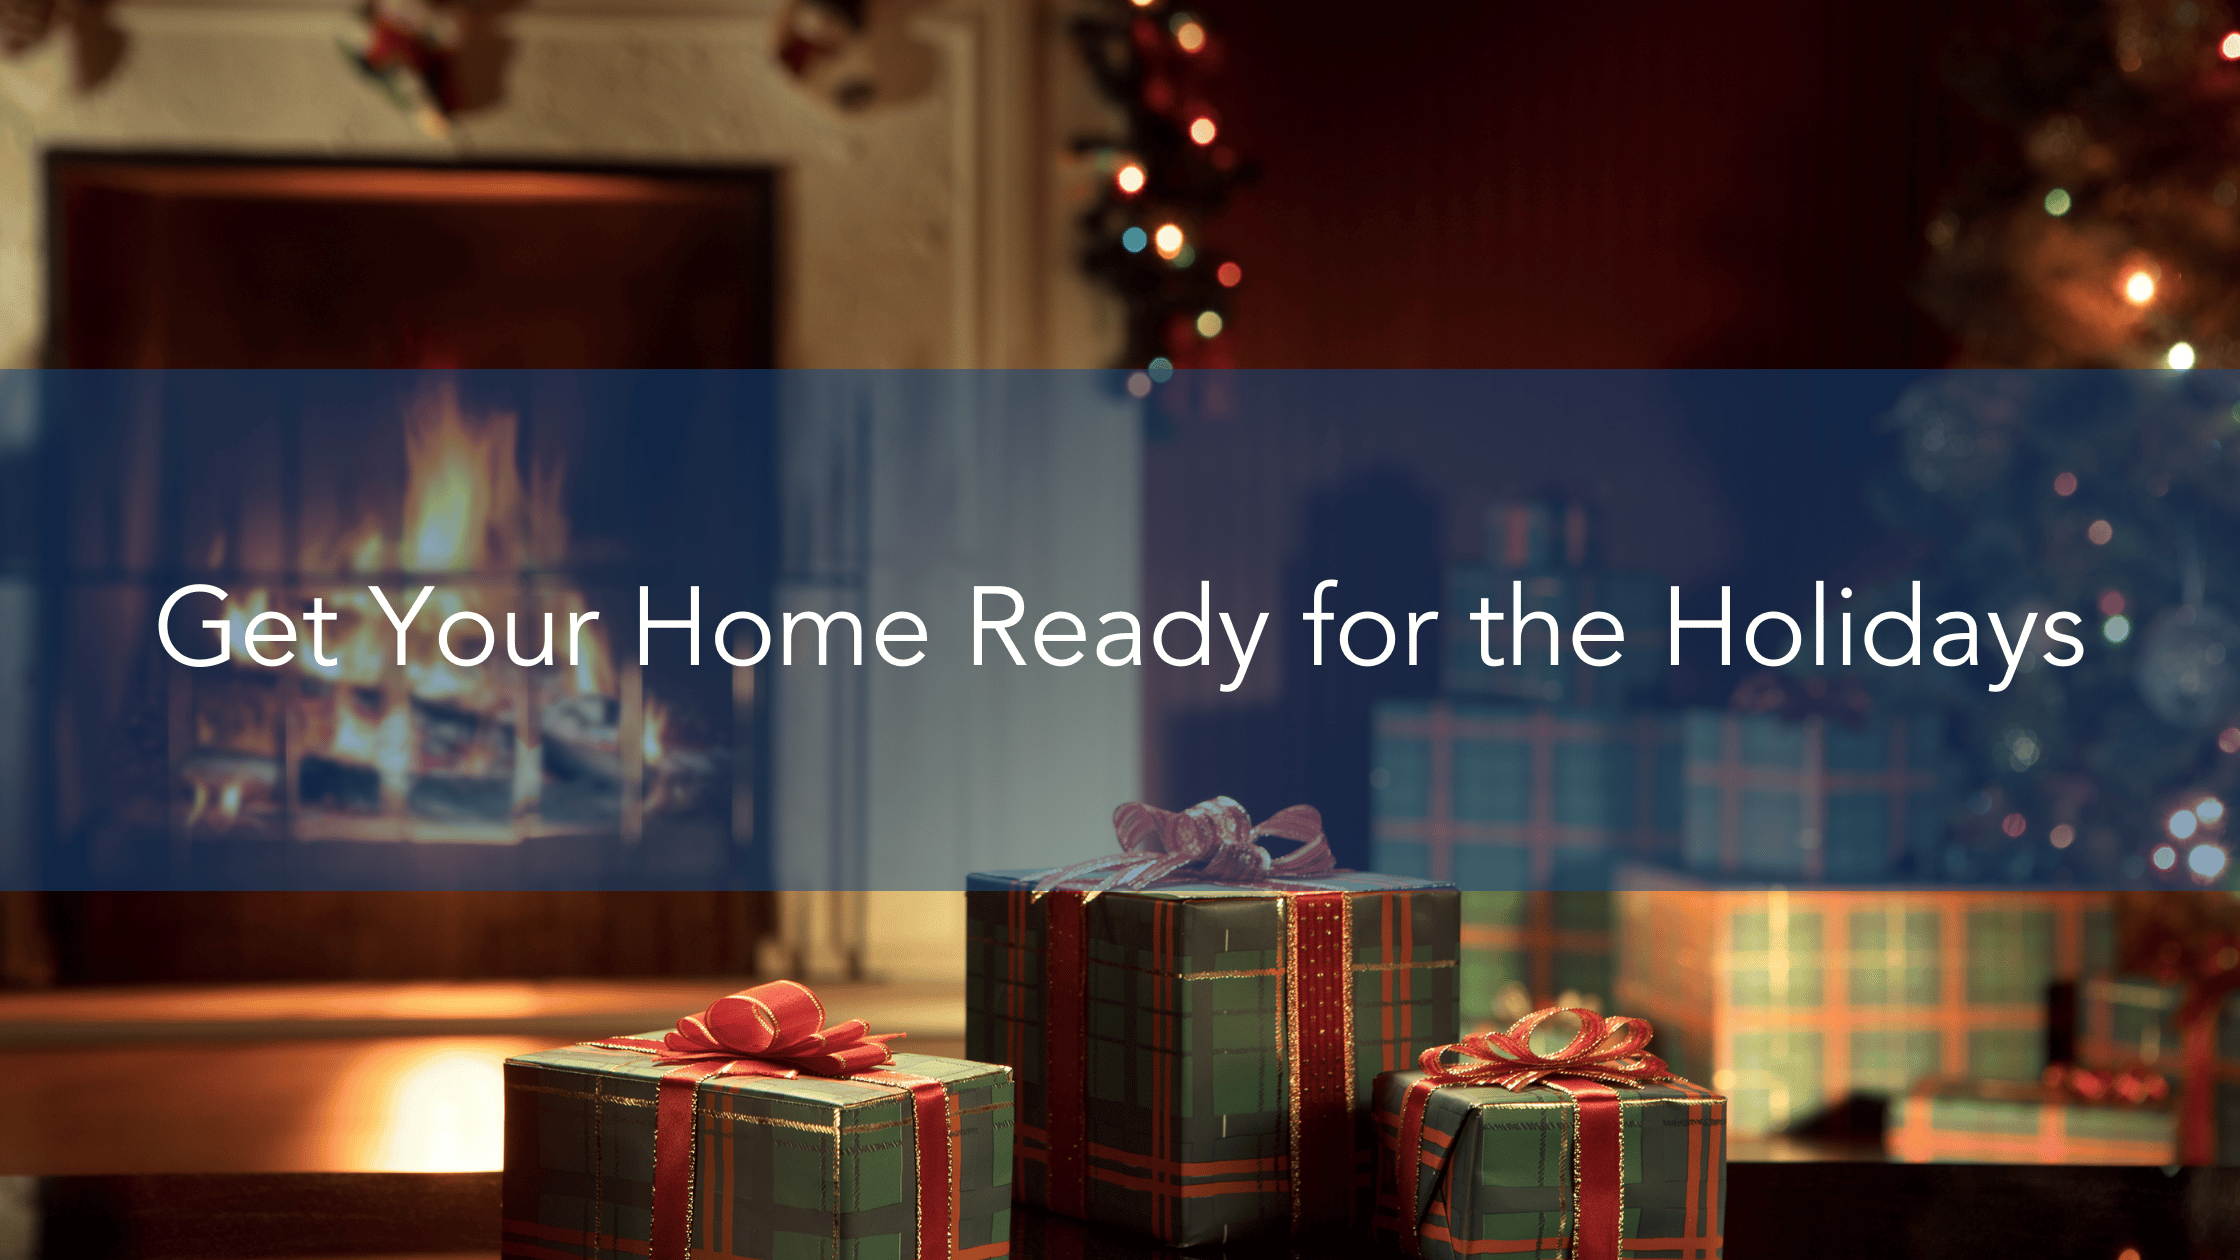 Get Your Home Ready for the Holidays